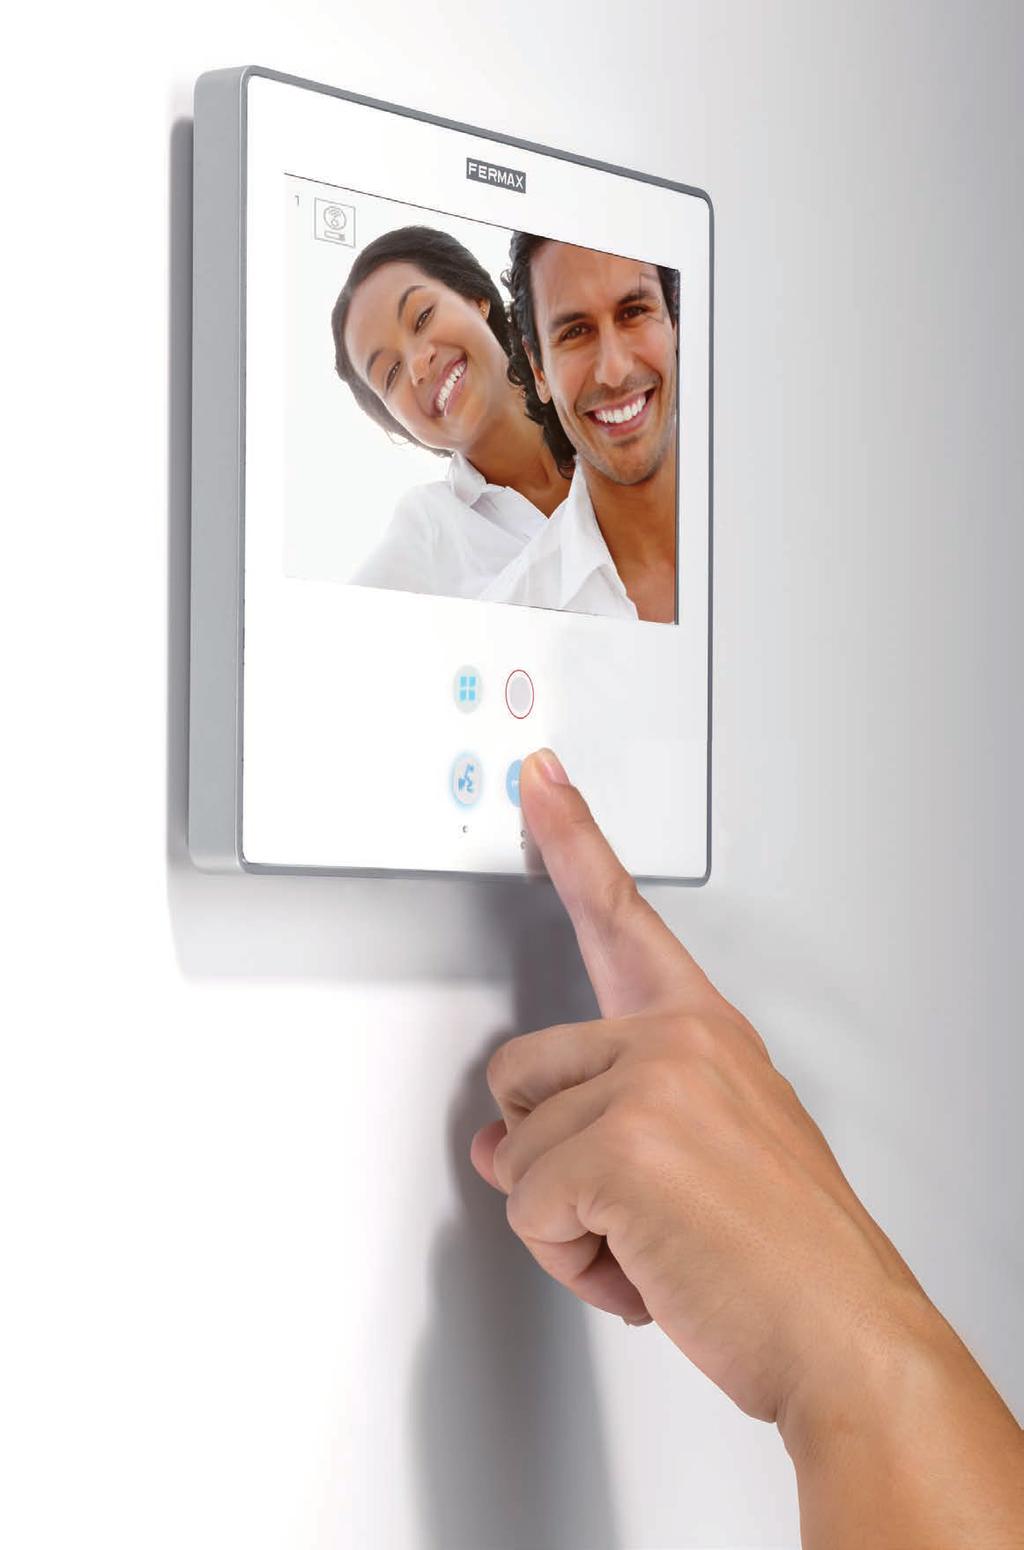 A new experience Smile offers the users a new experience in interaction.